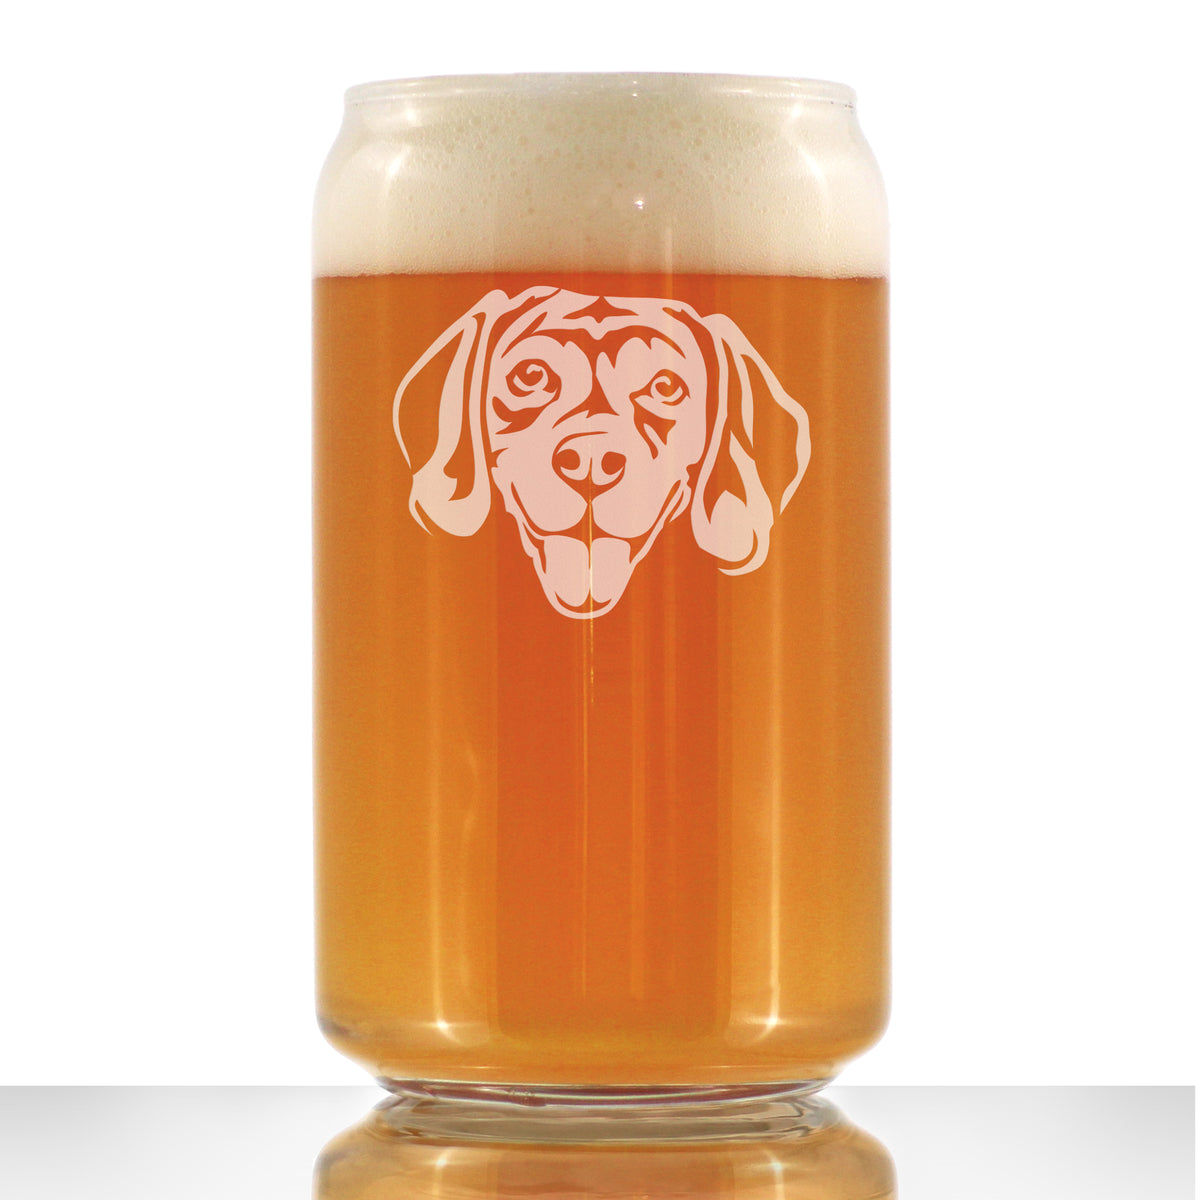 Happy Beagle Beer Can Pint Glass - Fun Dog Themed Decor and Gifts for Moms &amp; Dads of Beagles - 16 oz Glasses